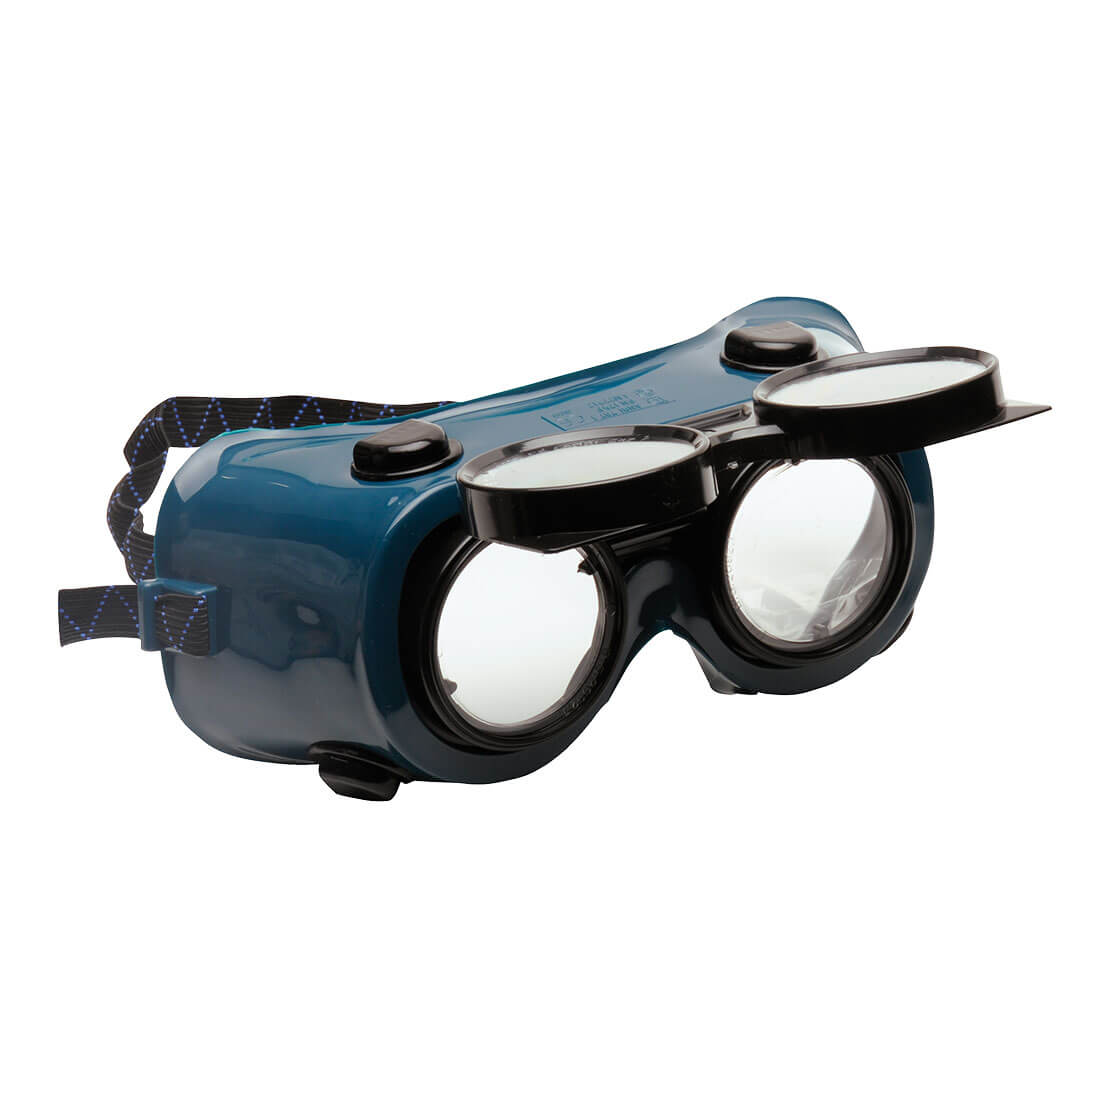 Portwest PW60 Gas Welding Goggles Flip up Safety Shade 5 CE Certified protection - Hamtons Direct